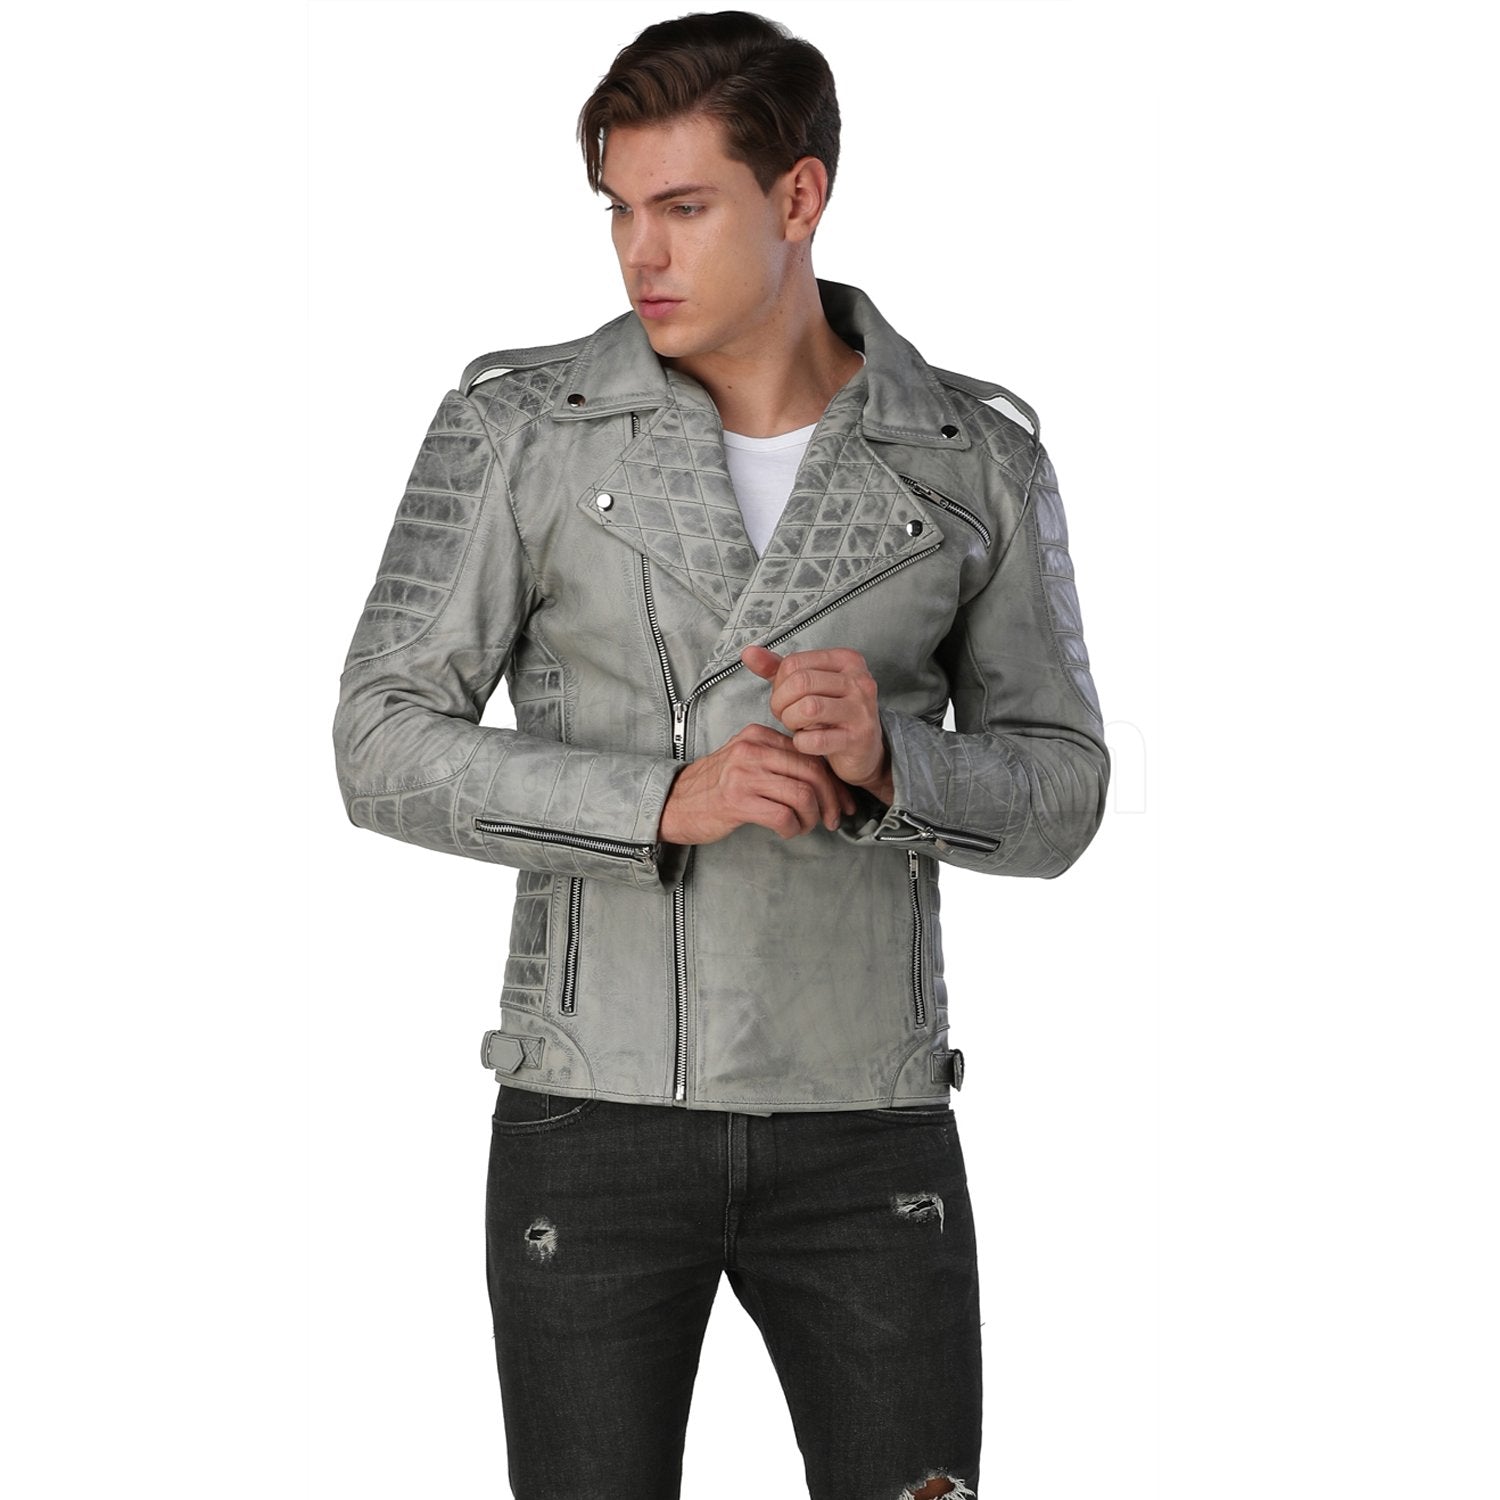 Gray Leather Jacket | Grey Leather Jackets for Men & Women - Leather Skin Shop